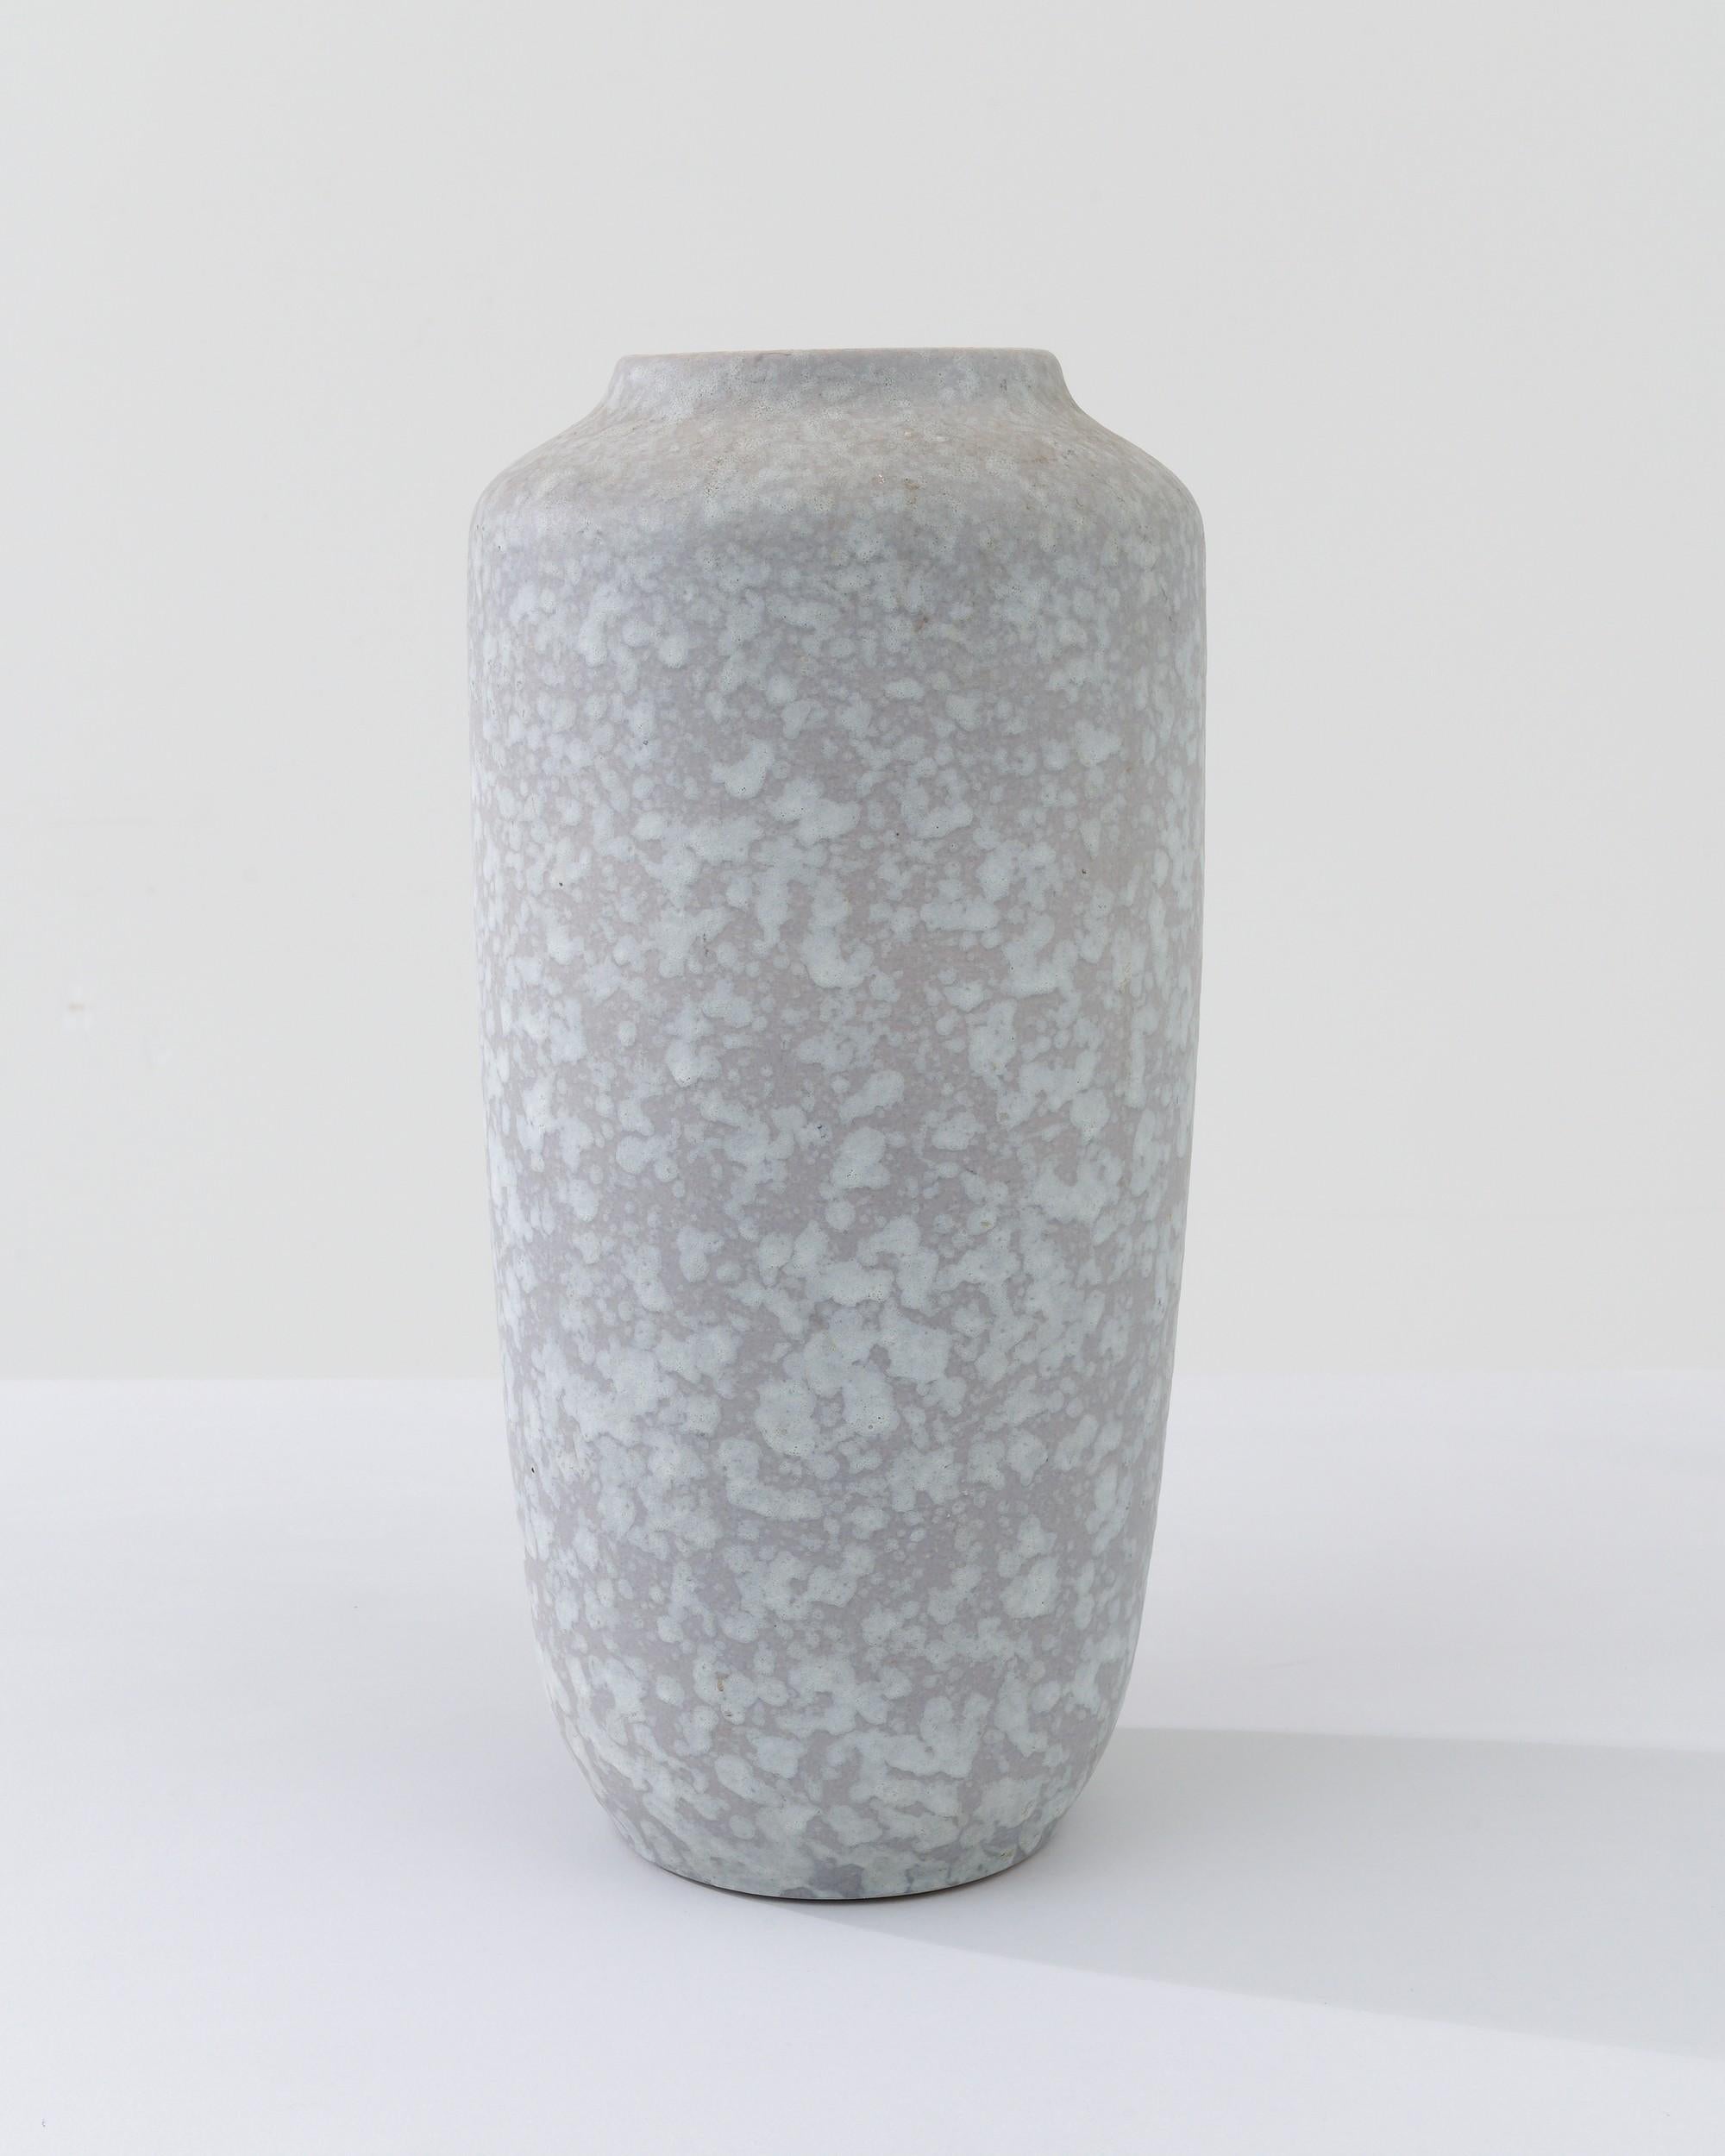 A ceramic vase from mid-20th century Germany. Neither large nor small, this studio made pot reflects the hand-held, and the handmade; the tactility of process and the artist's vision– realized on the potter’s wheel. Cool colored neutrals intermingle